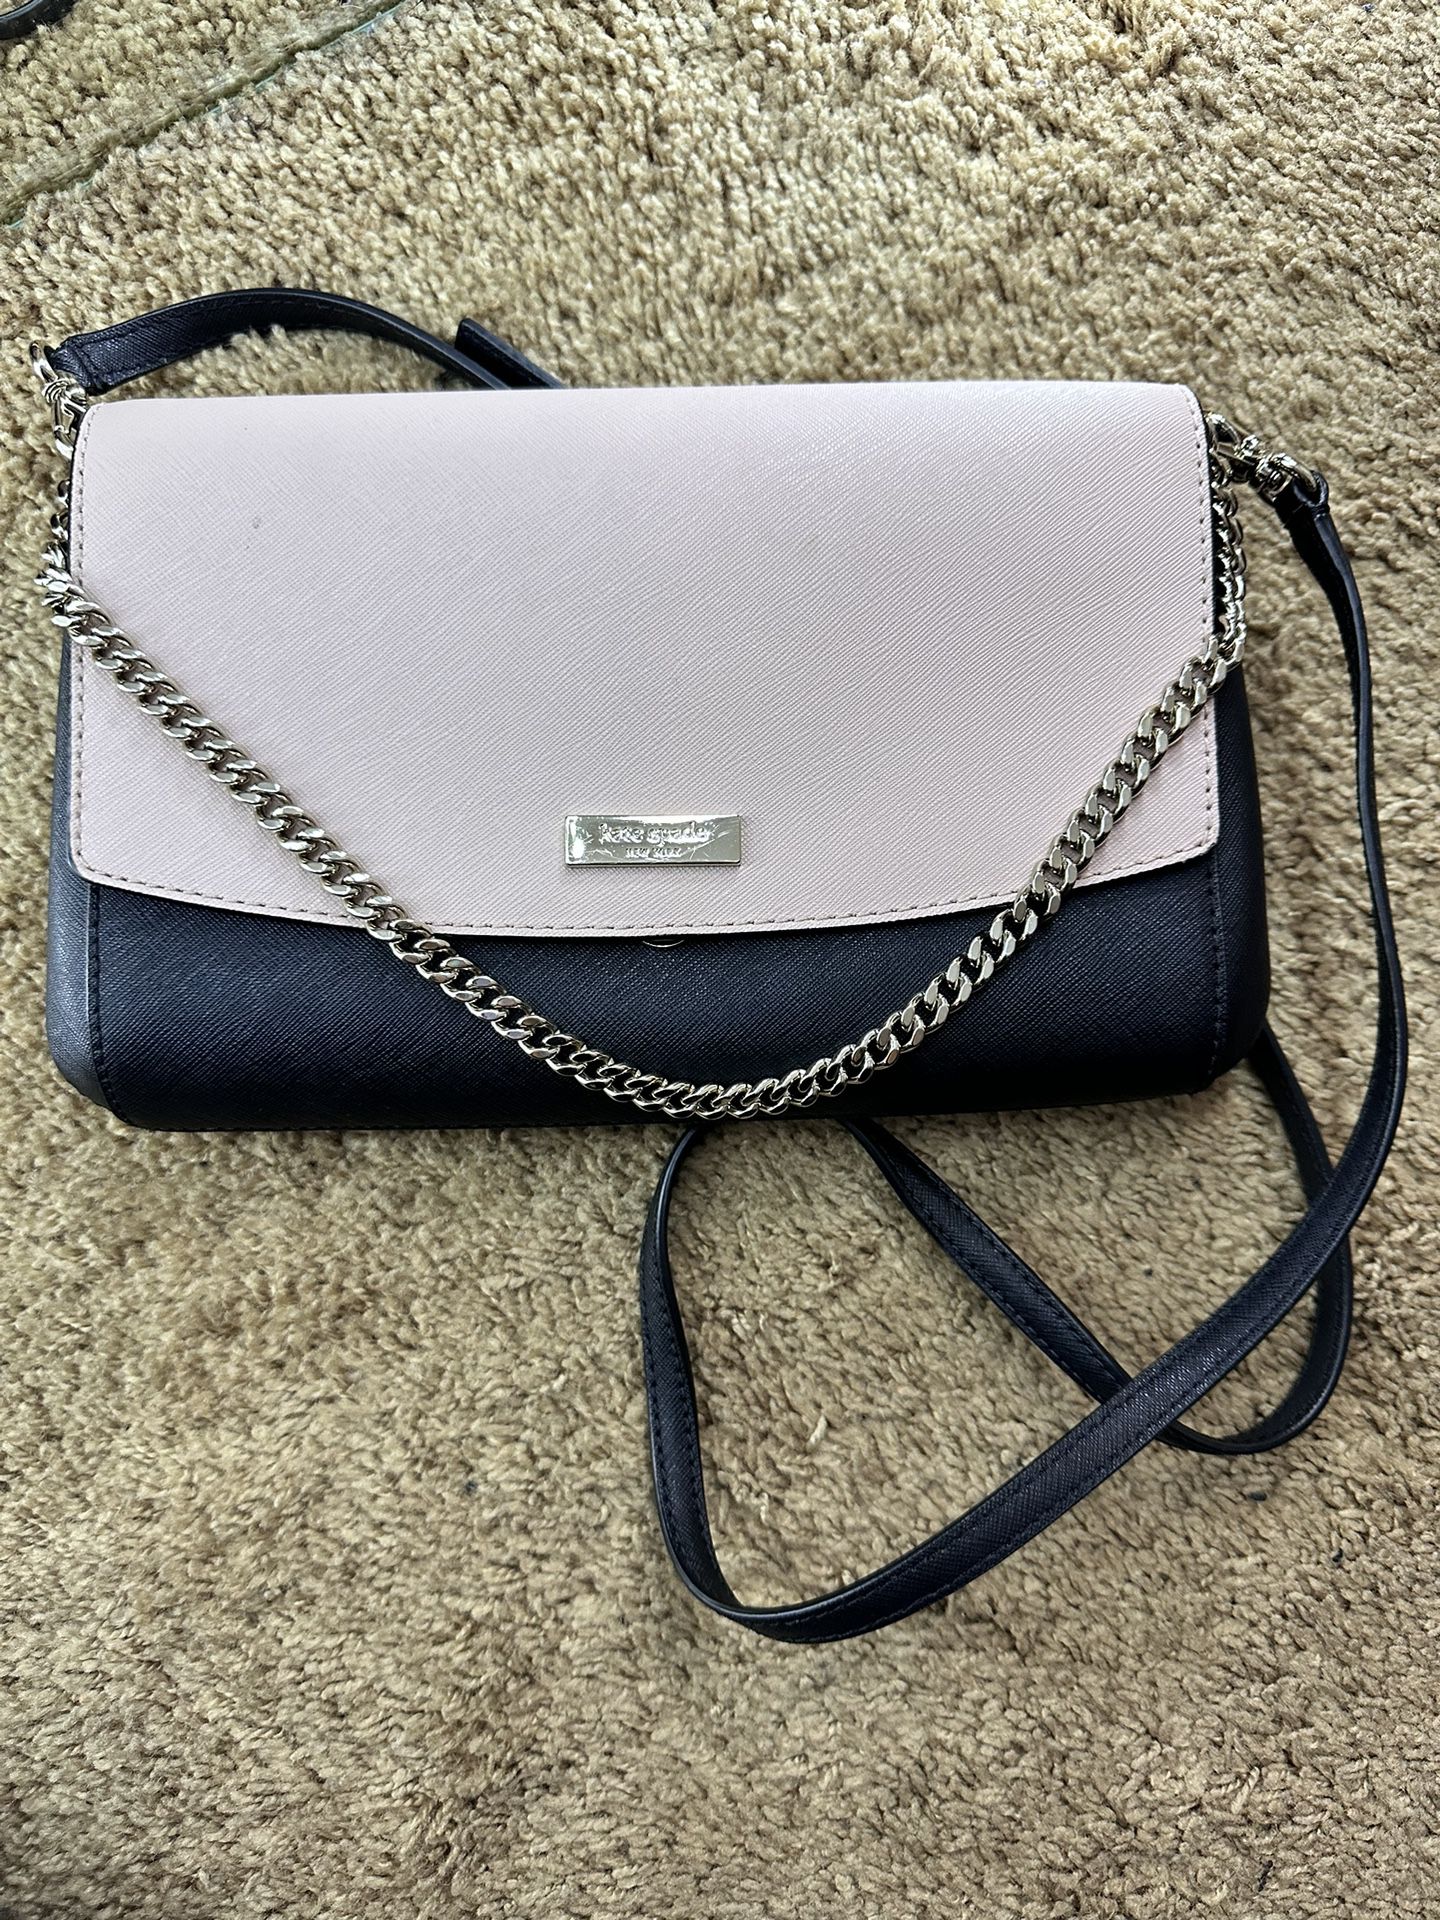 Kate Spade Black with Pink crossbody